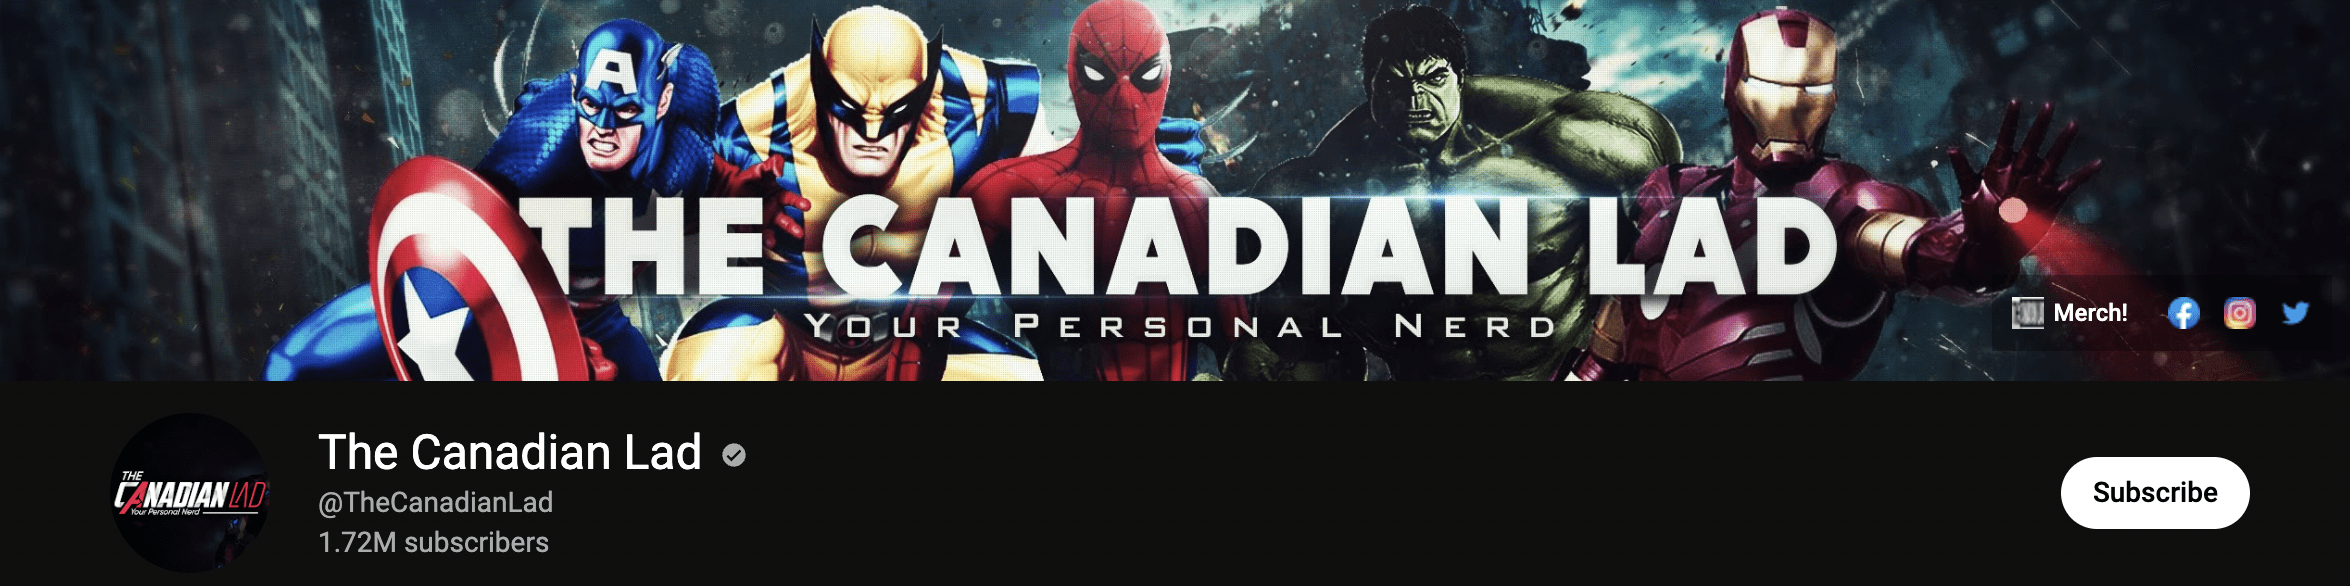 The Canadian Lad Youtube Cover